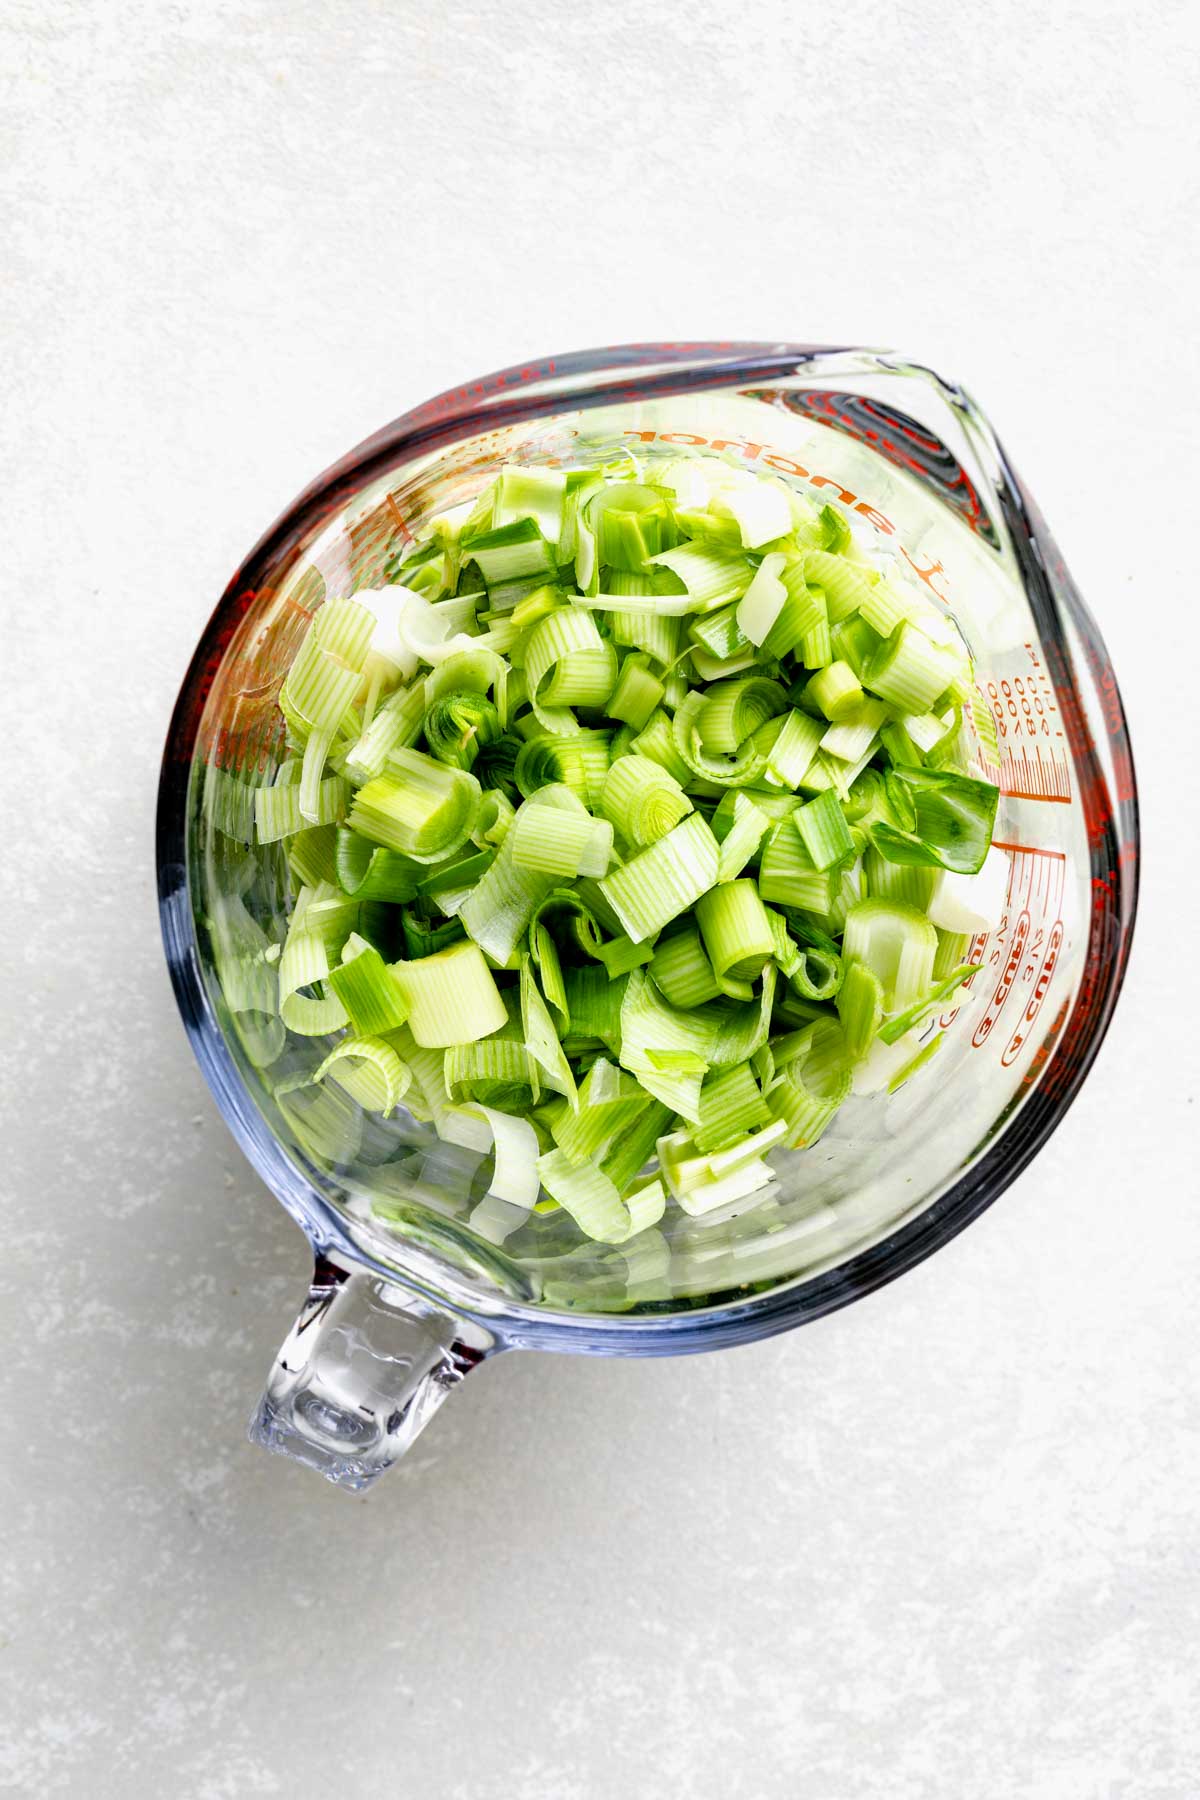 3 cups of leeks in a measuring cup